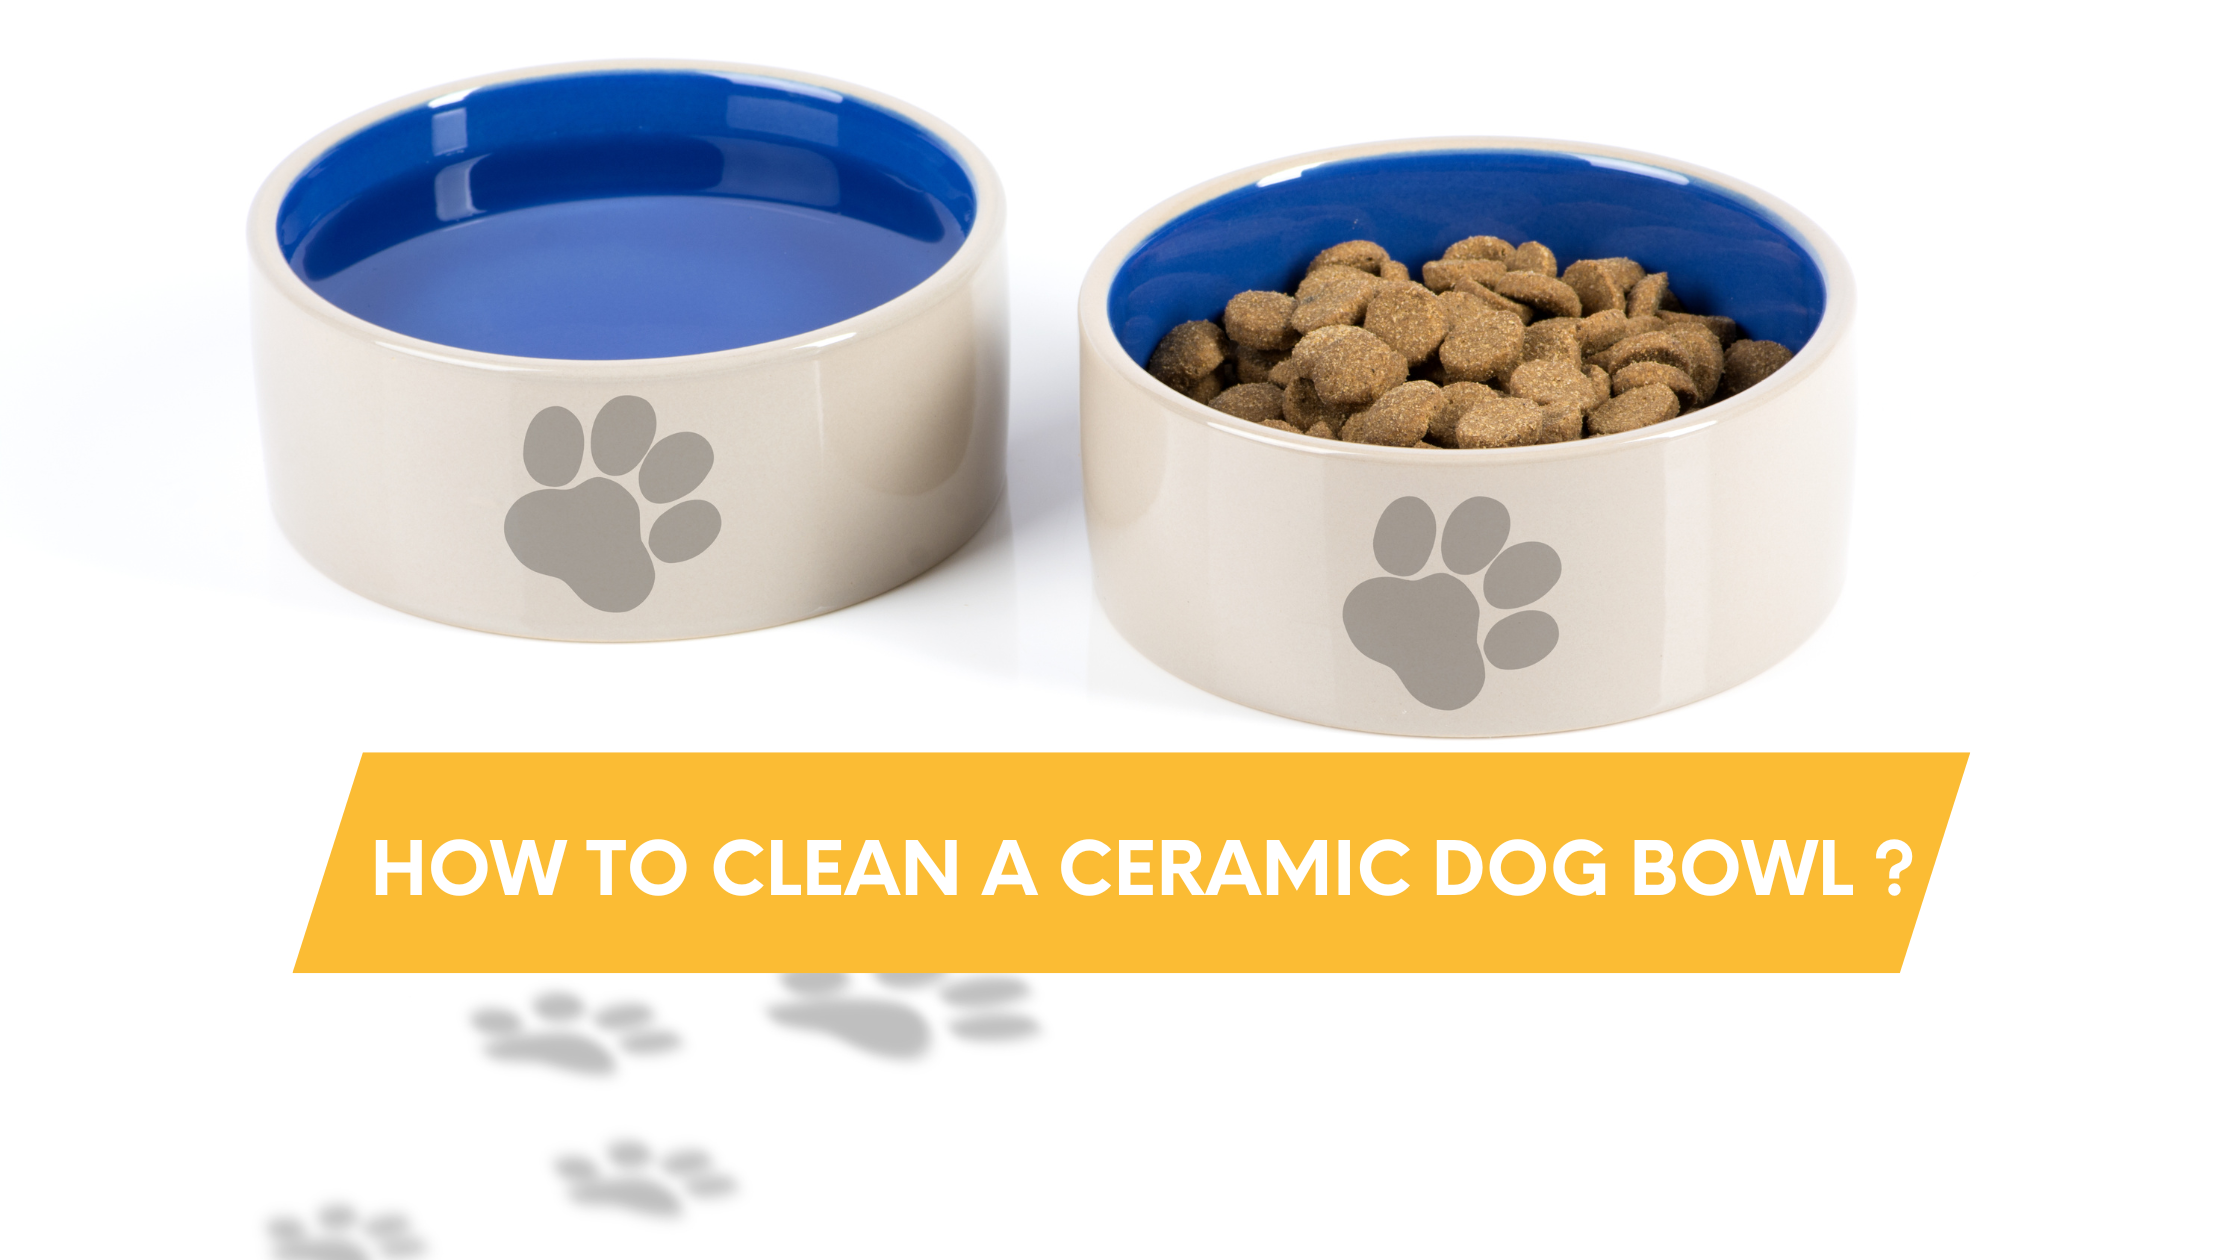 How to clean a ceramic dog bowl